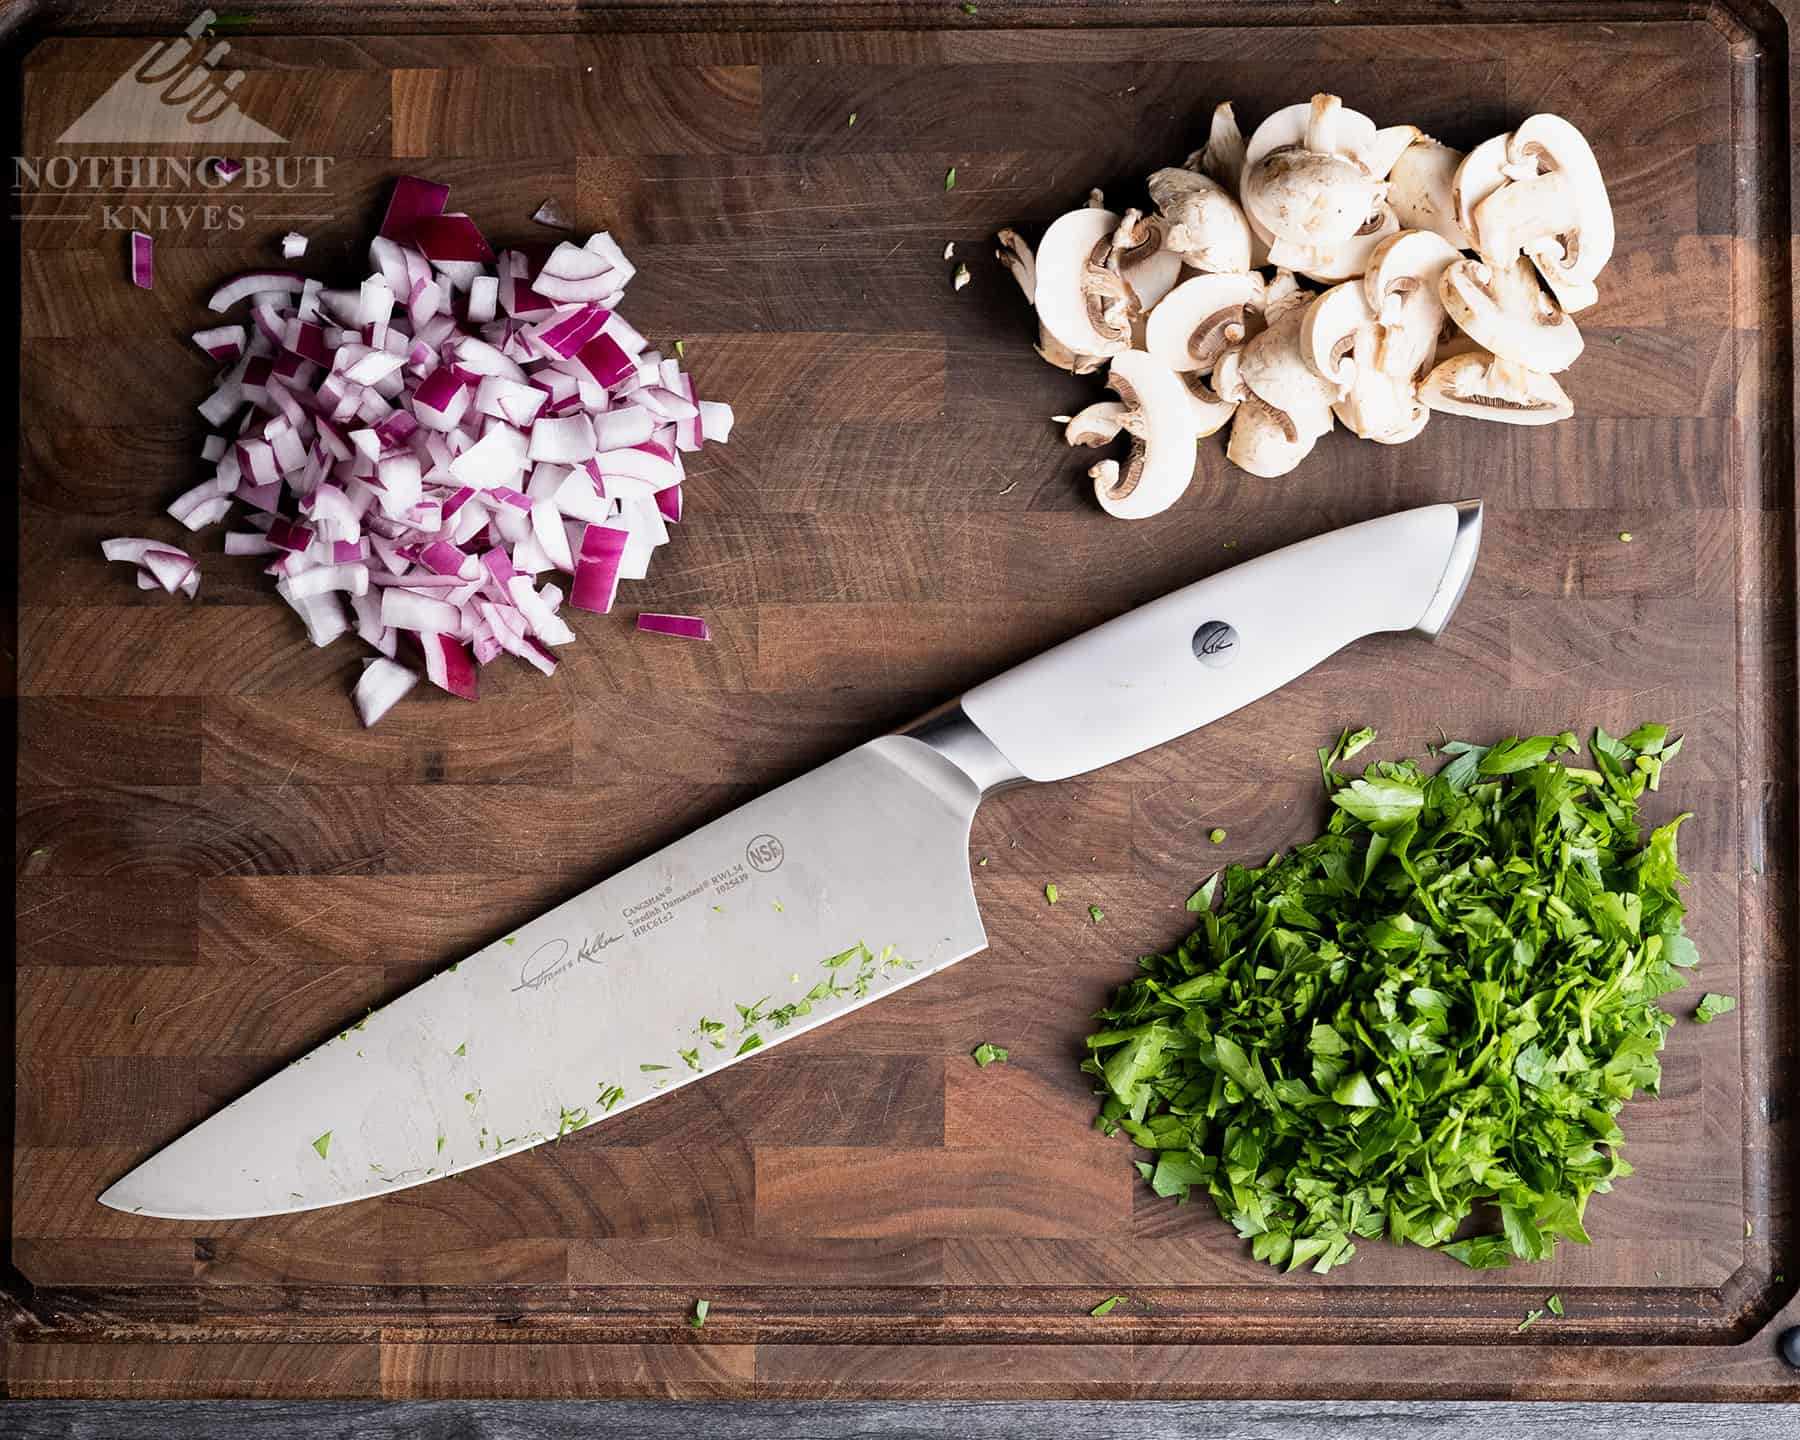 The Cangshan Thomas Keller 8 inch chef knife is one of our most recommended chef knives. 